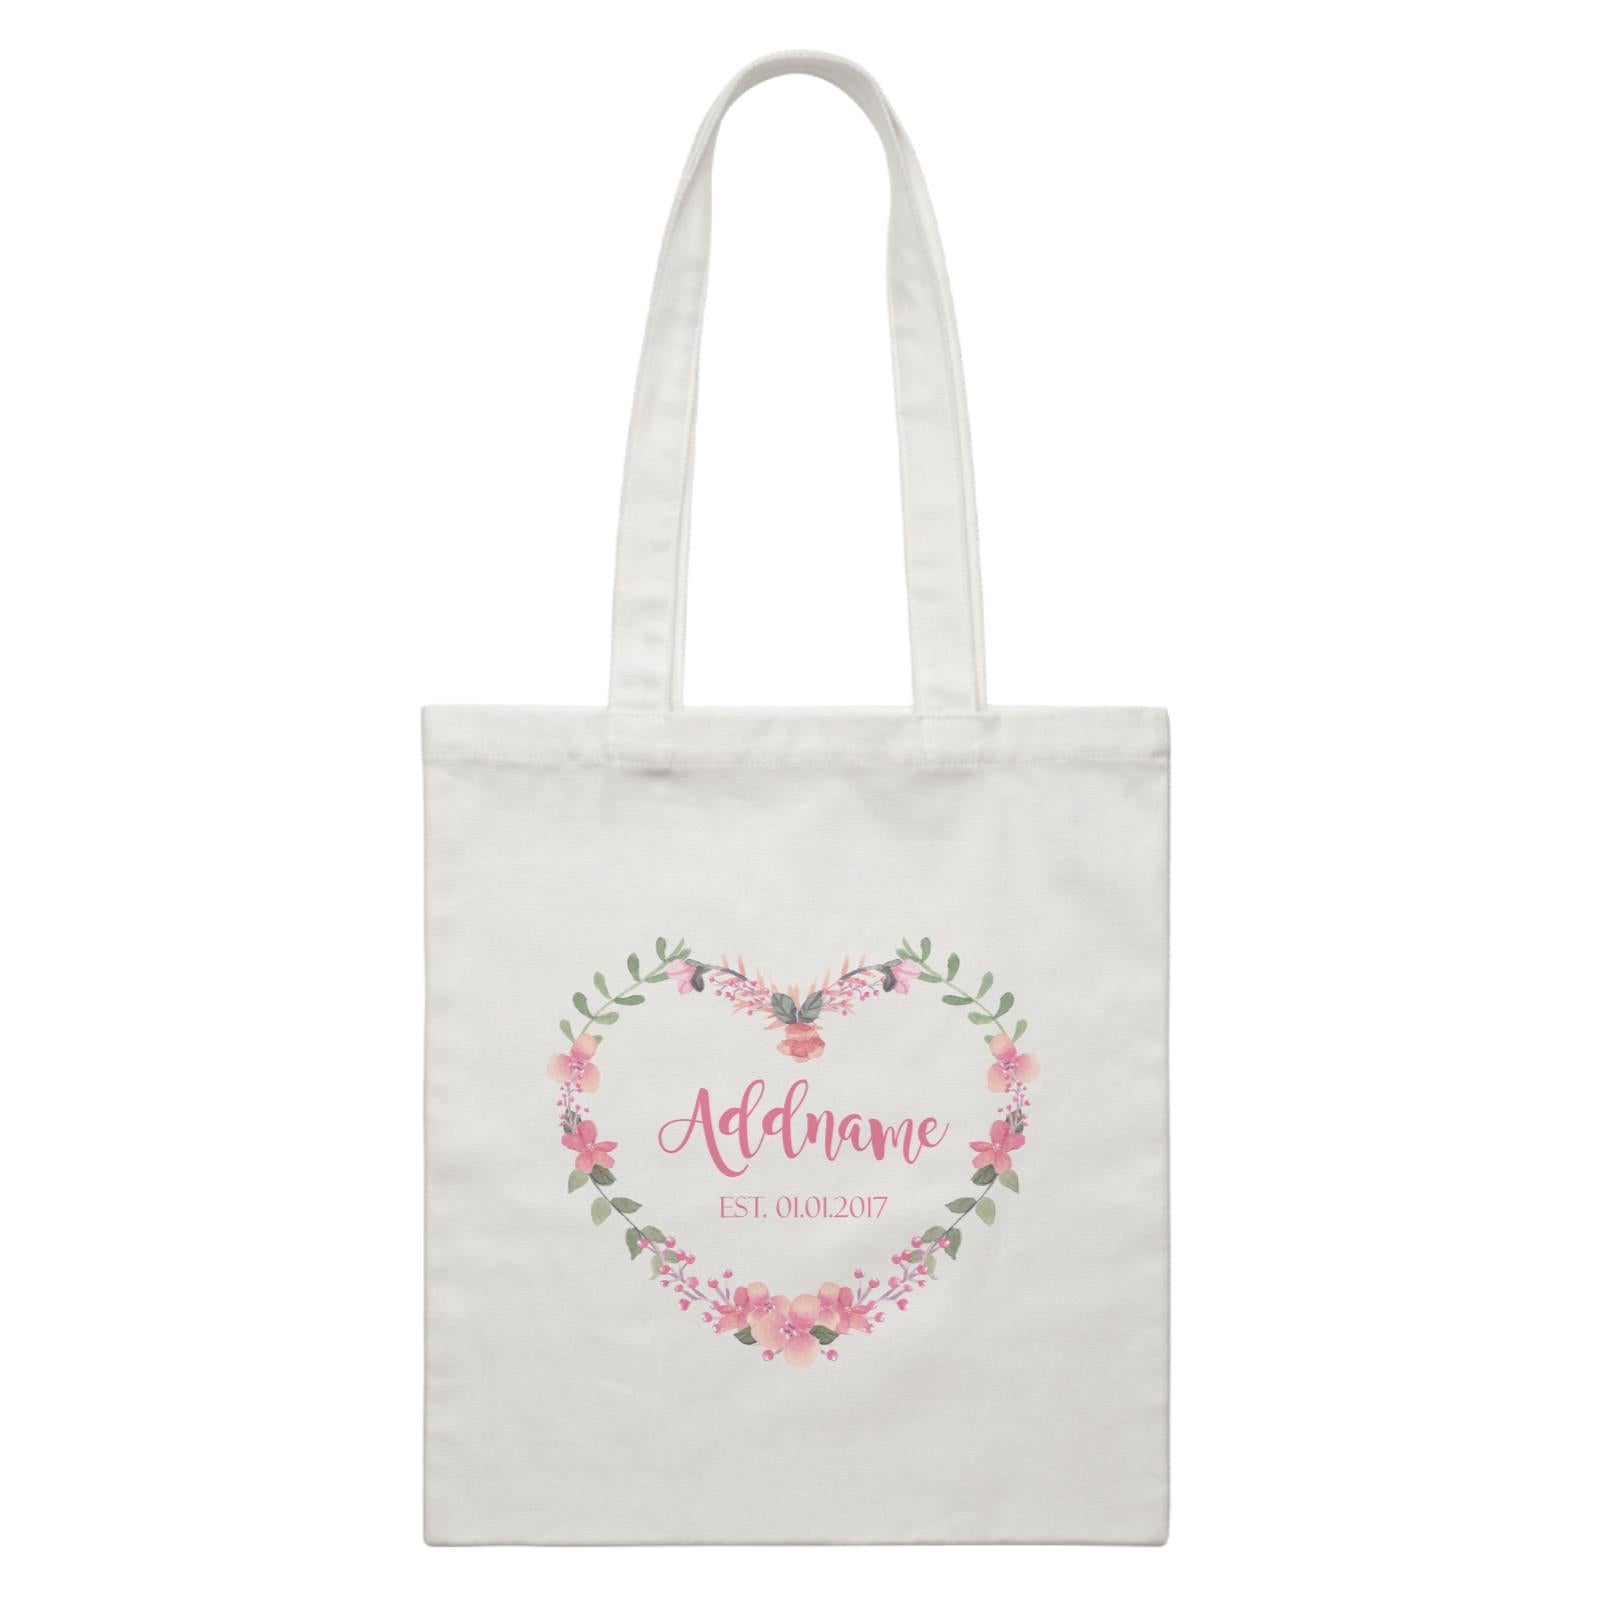 Add Name and Add Date in Pink Heart Shaped Flower Wreath White Canvas Bag